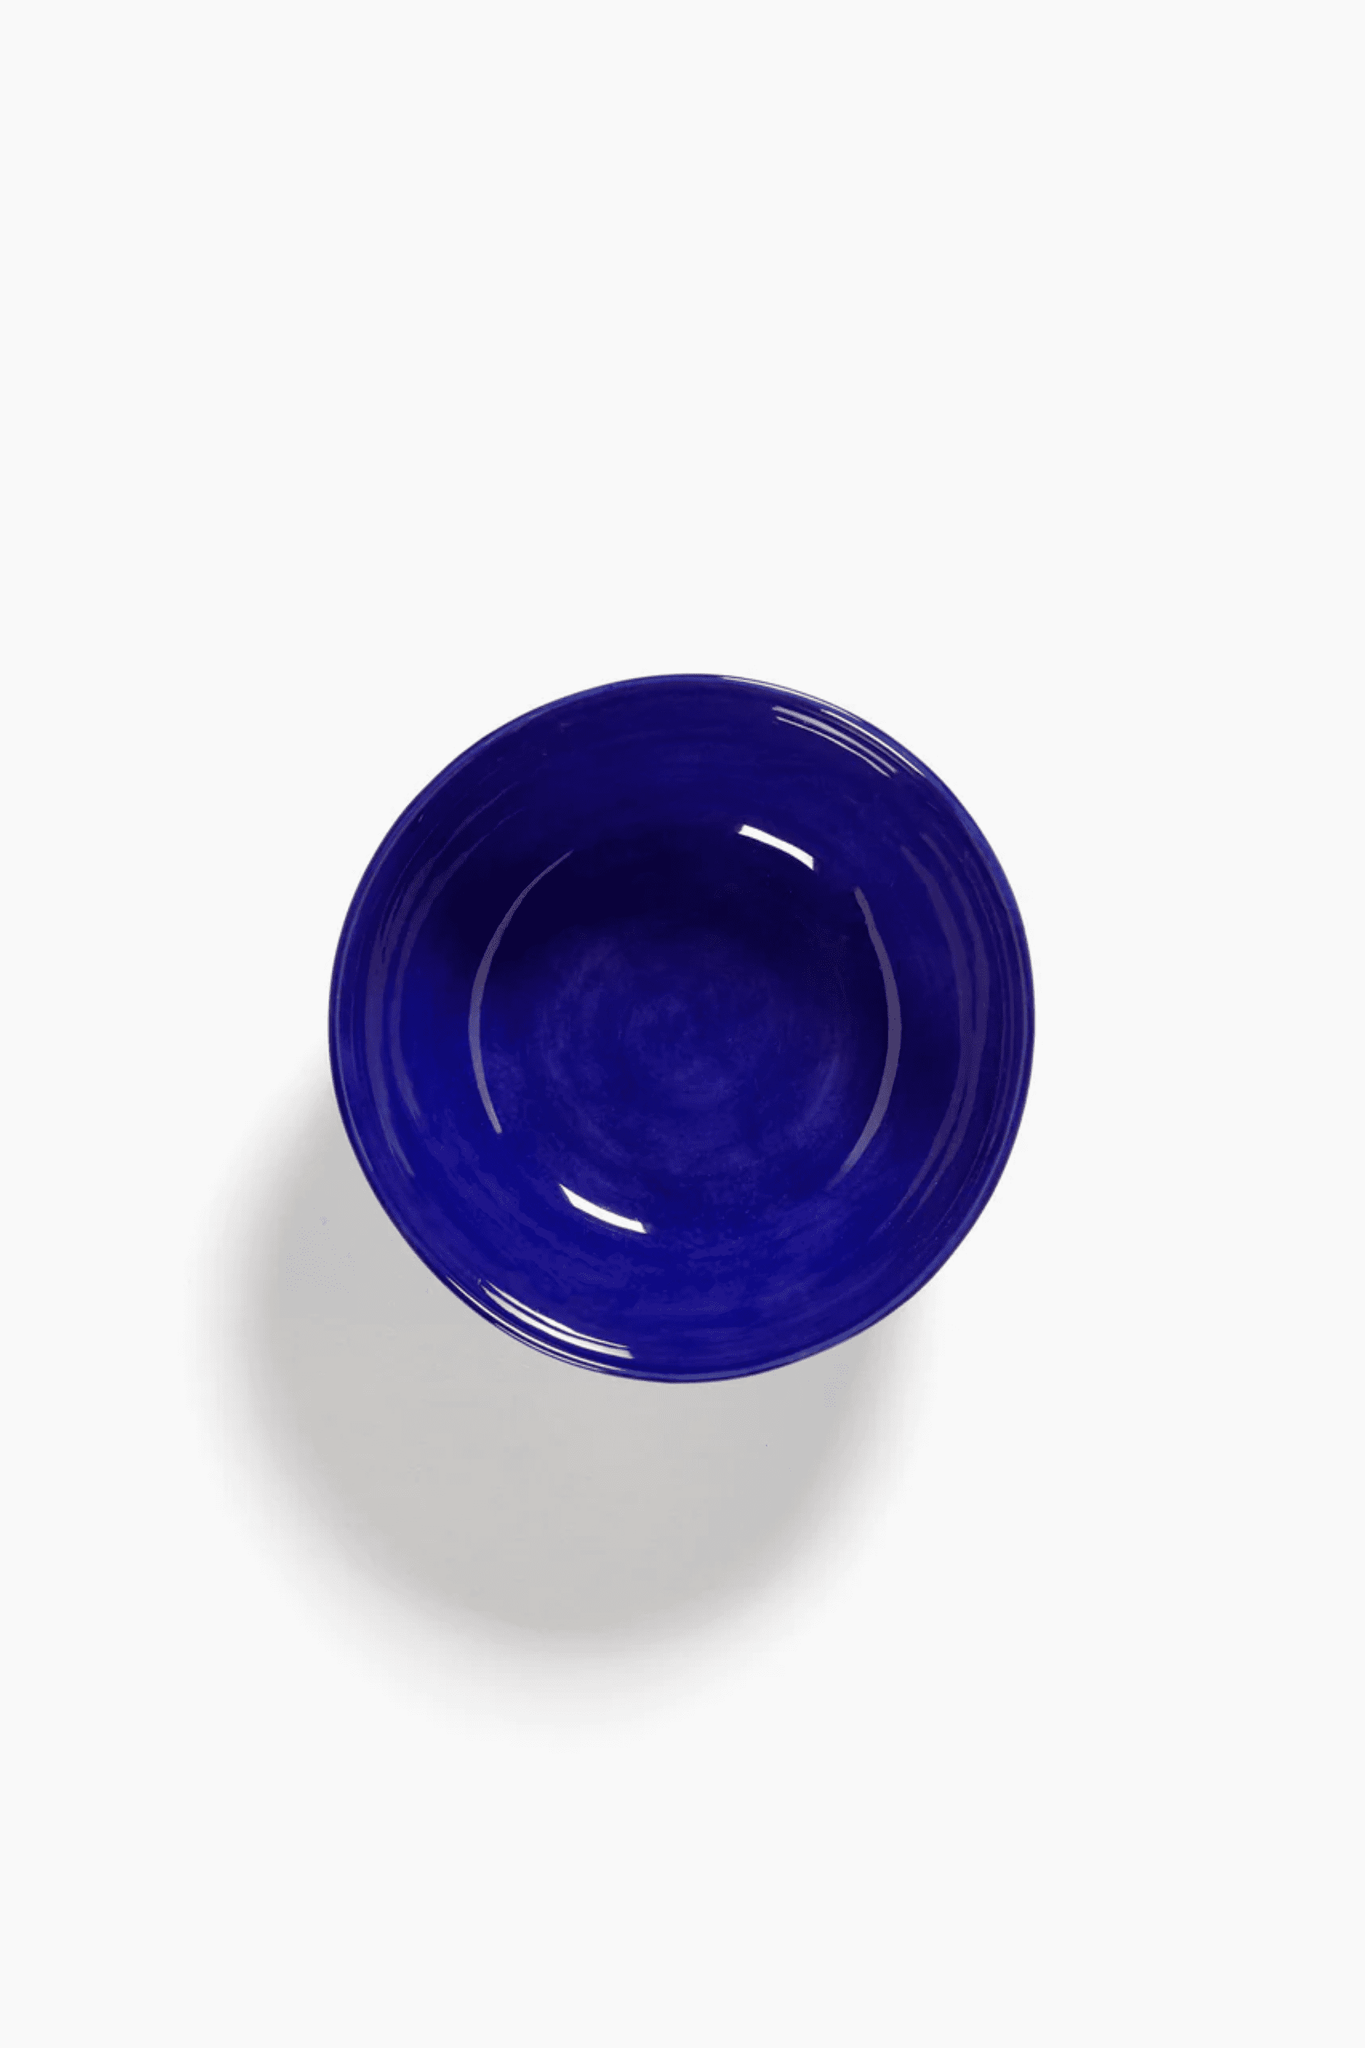 Set of 4 Large Bowls, Lapis Lazuli Swirl with White Stripes Ottolenghi Serax, top view